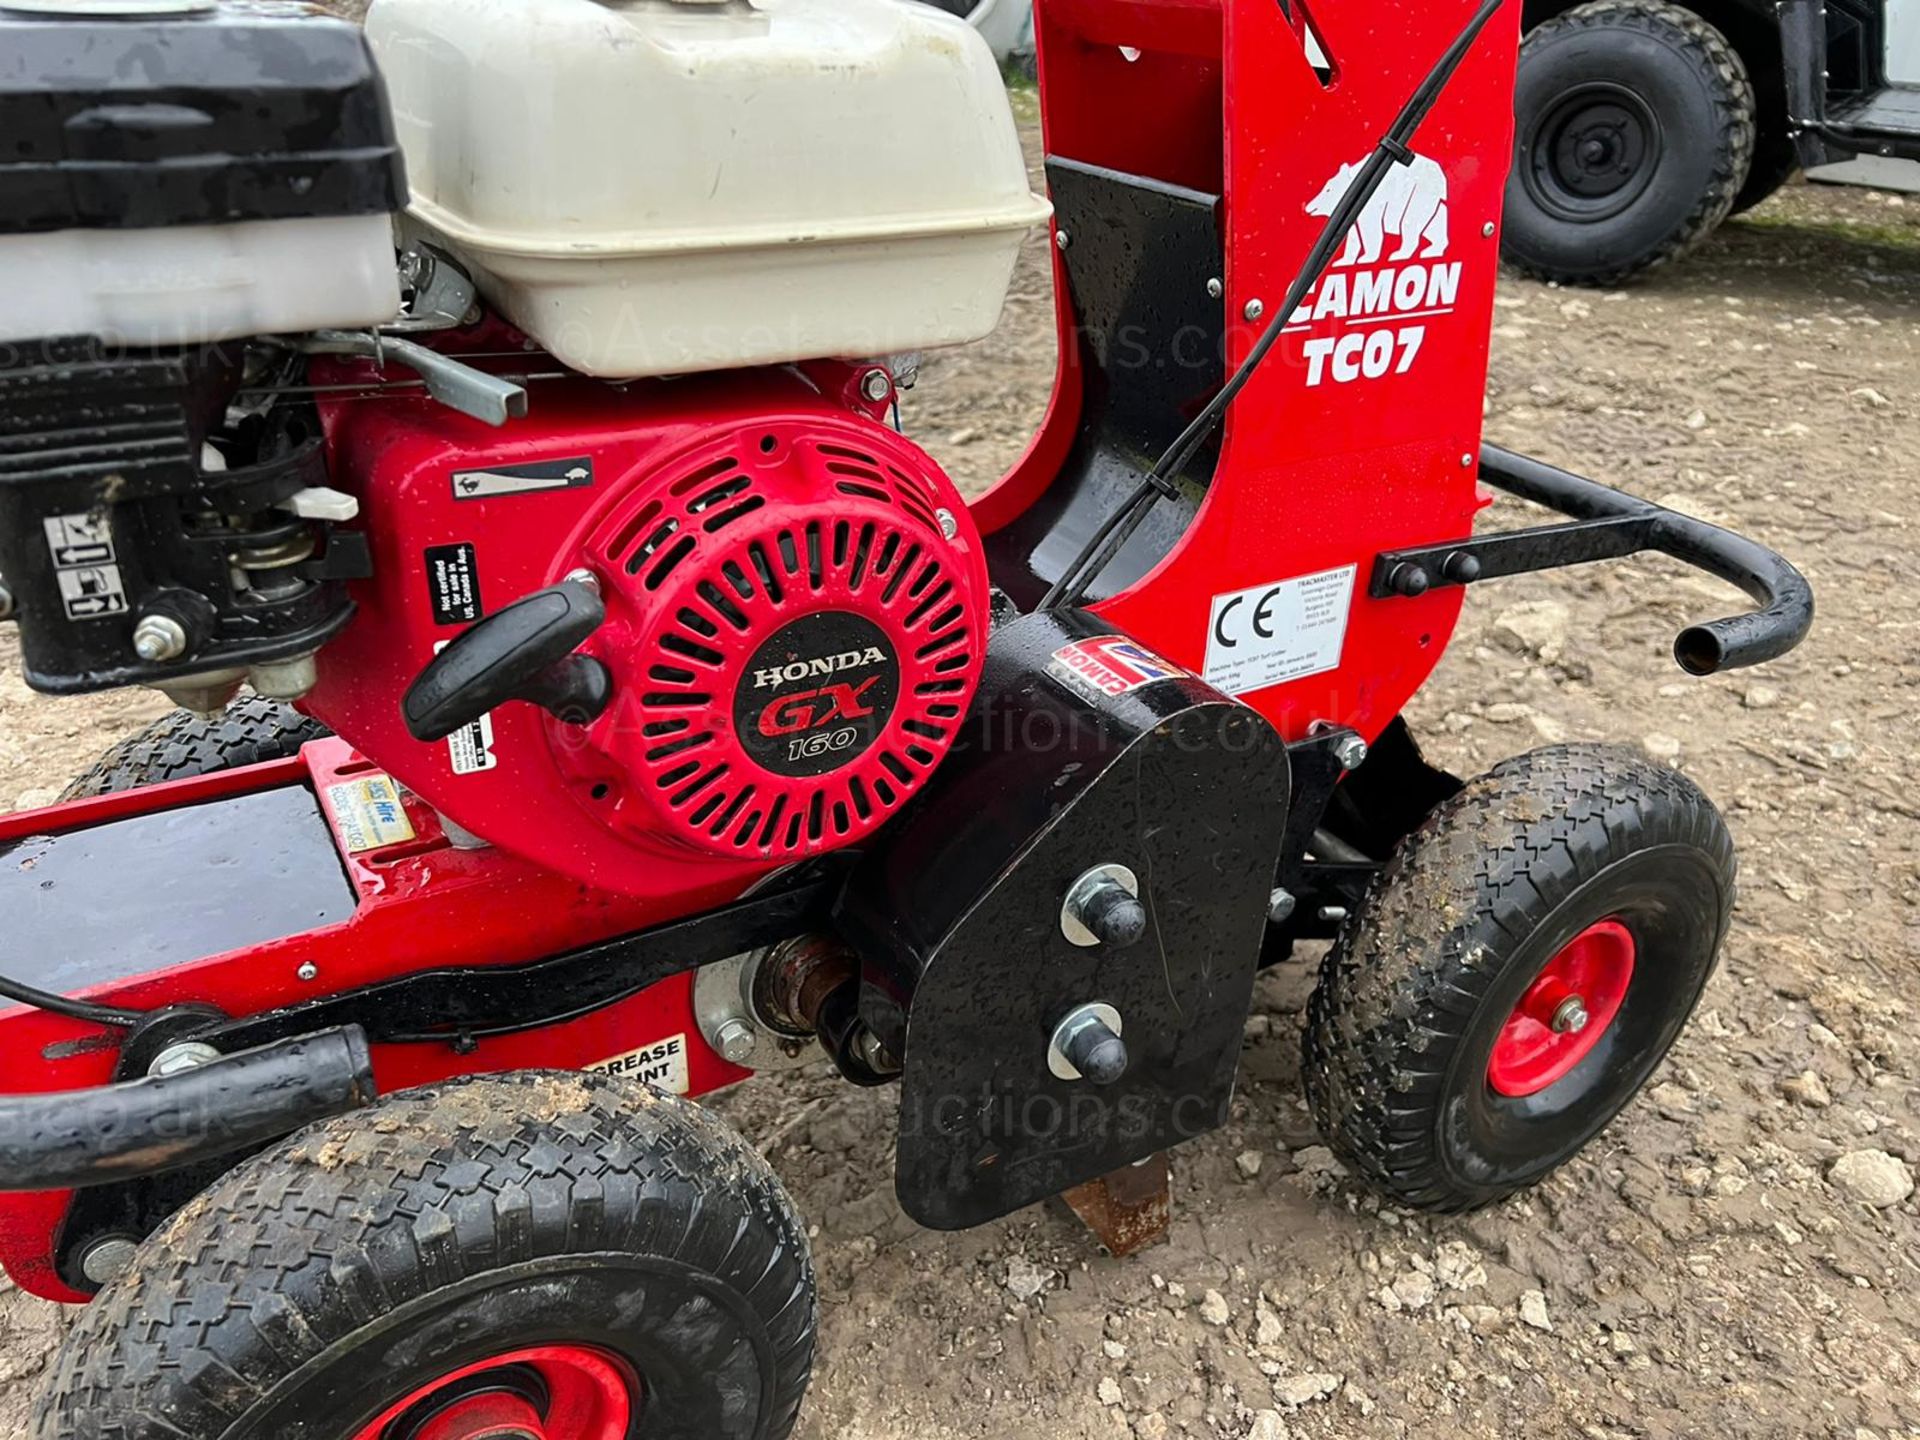 2020 CAMON TC07 TURF CUTTER, RUNS AND WORKS WELL, LIKE NEW, GREAT CONDITION, HONDA GX160 ENGINE - Image 8 of 9